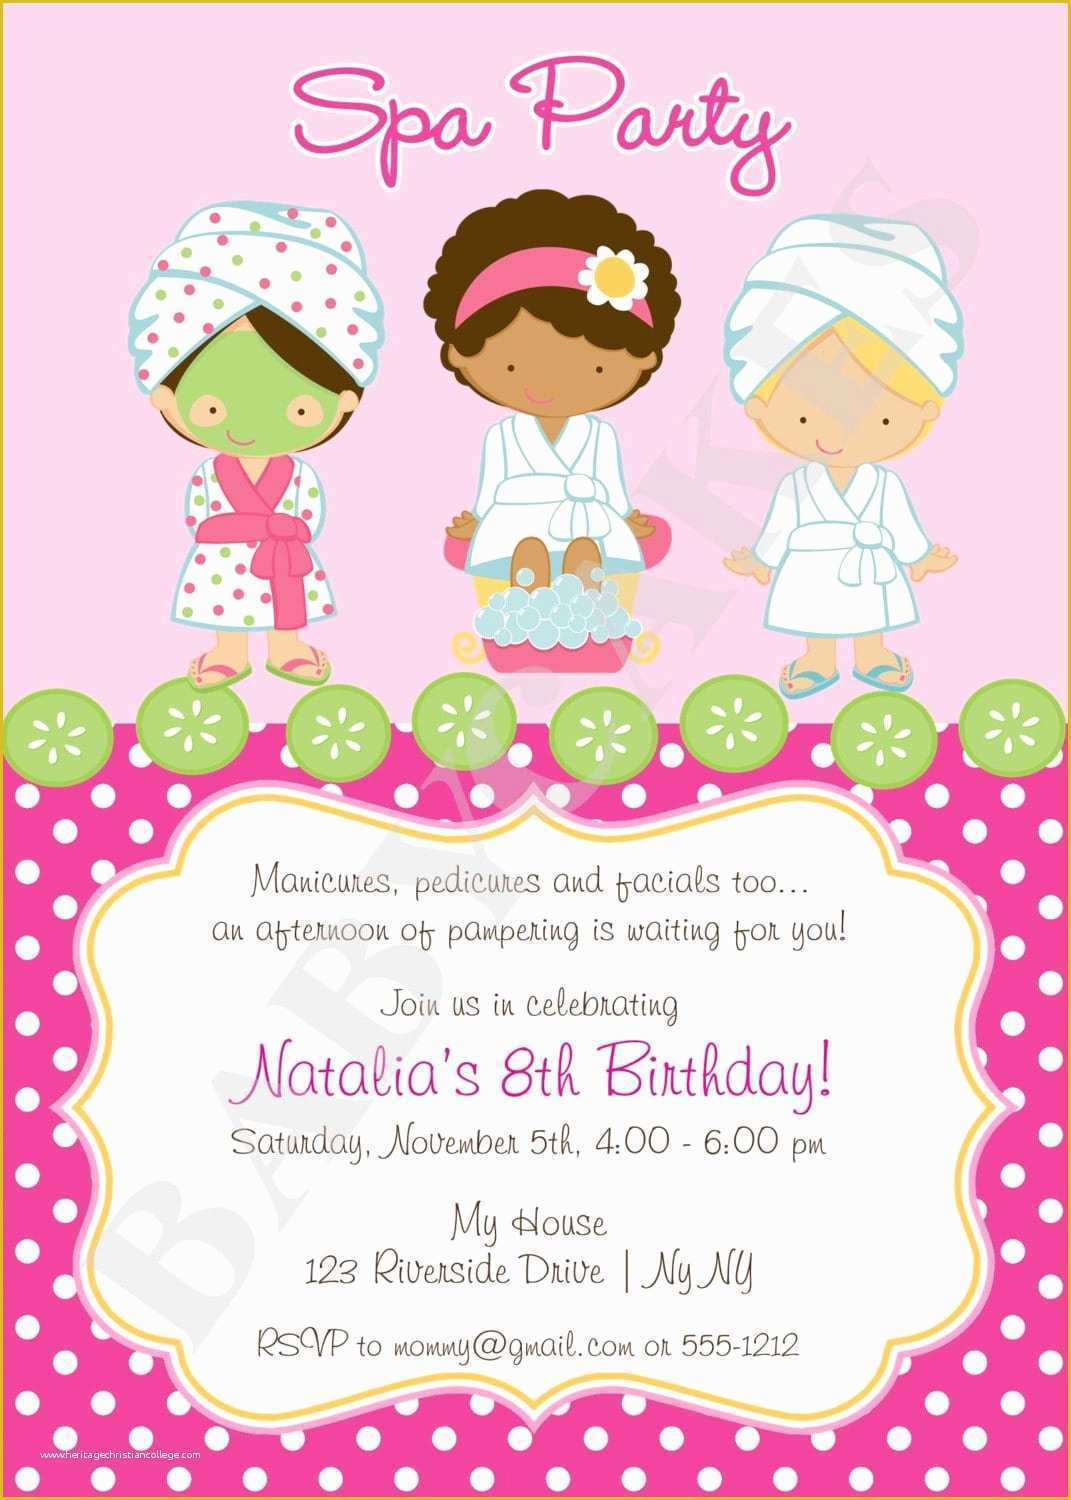 Free Printable Spa Party Invitations Templates Of Spa Party Invitation